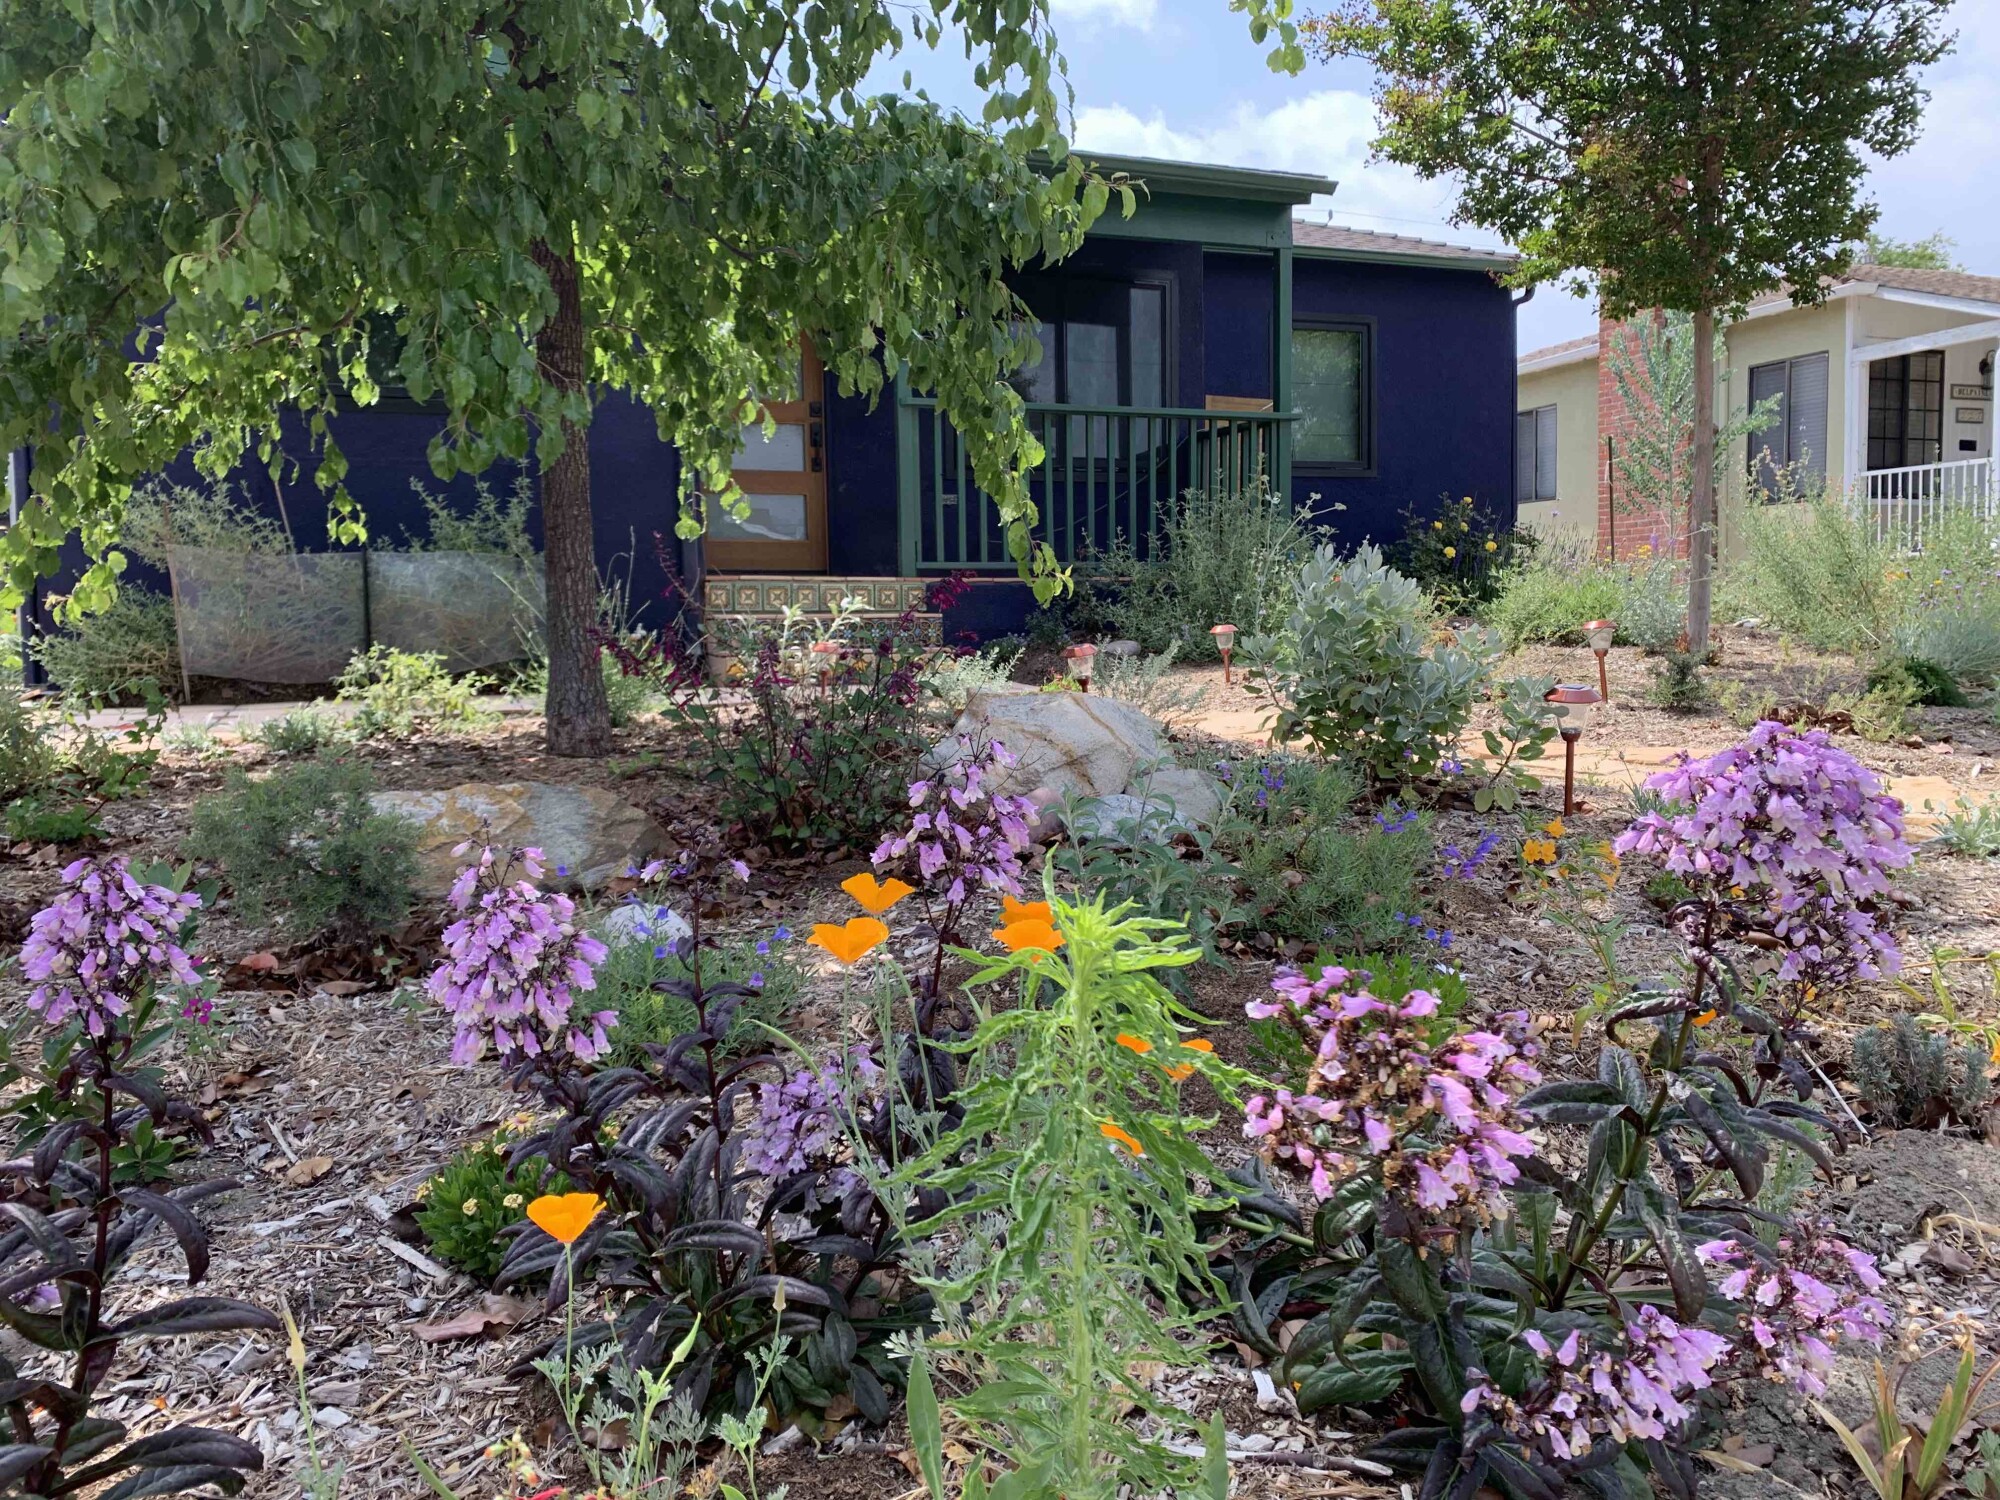 And after: Drought-tolerant native plants replaced thirsty lawns.